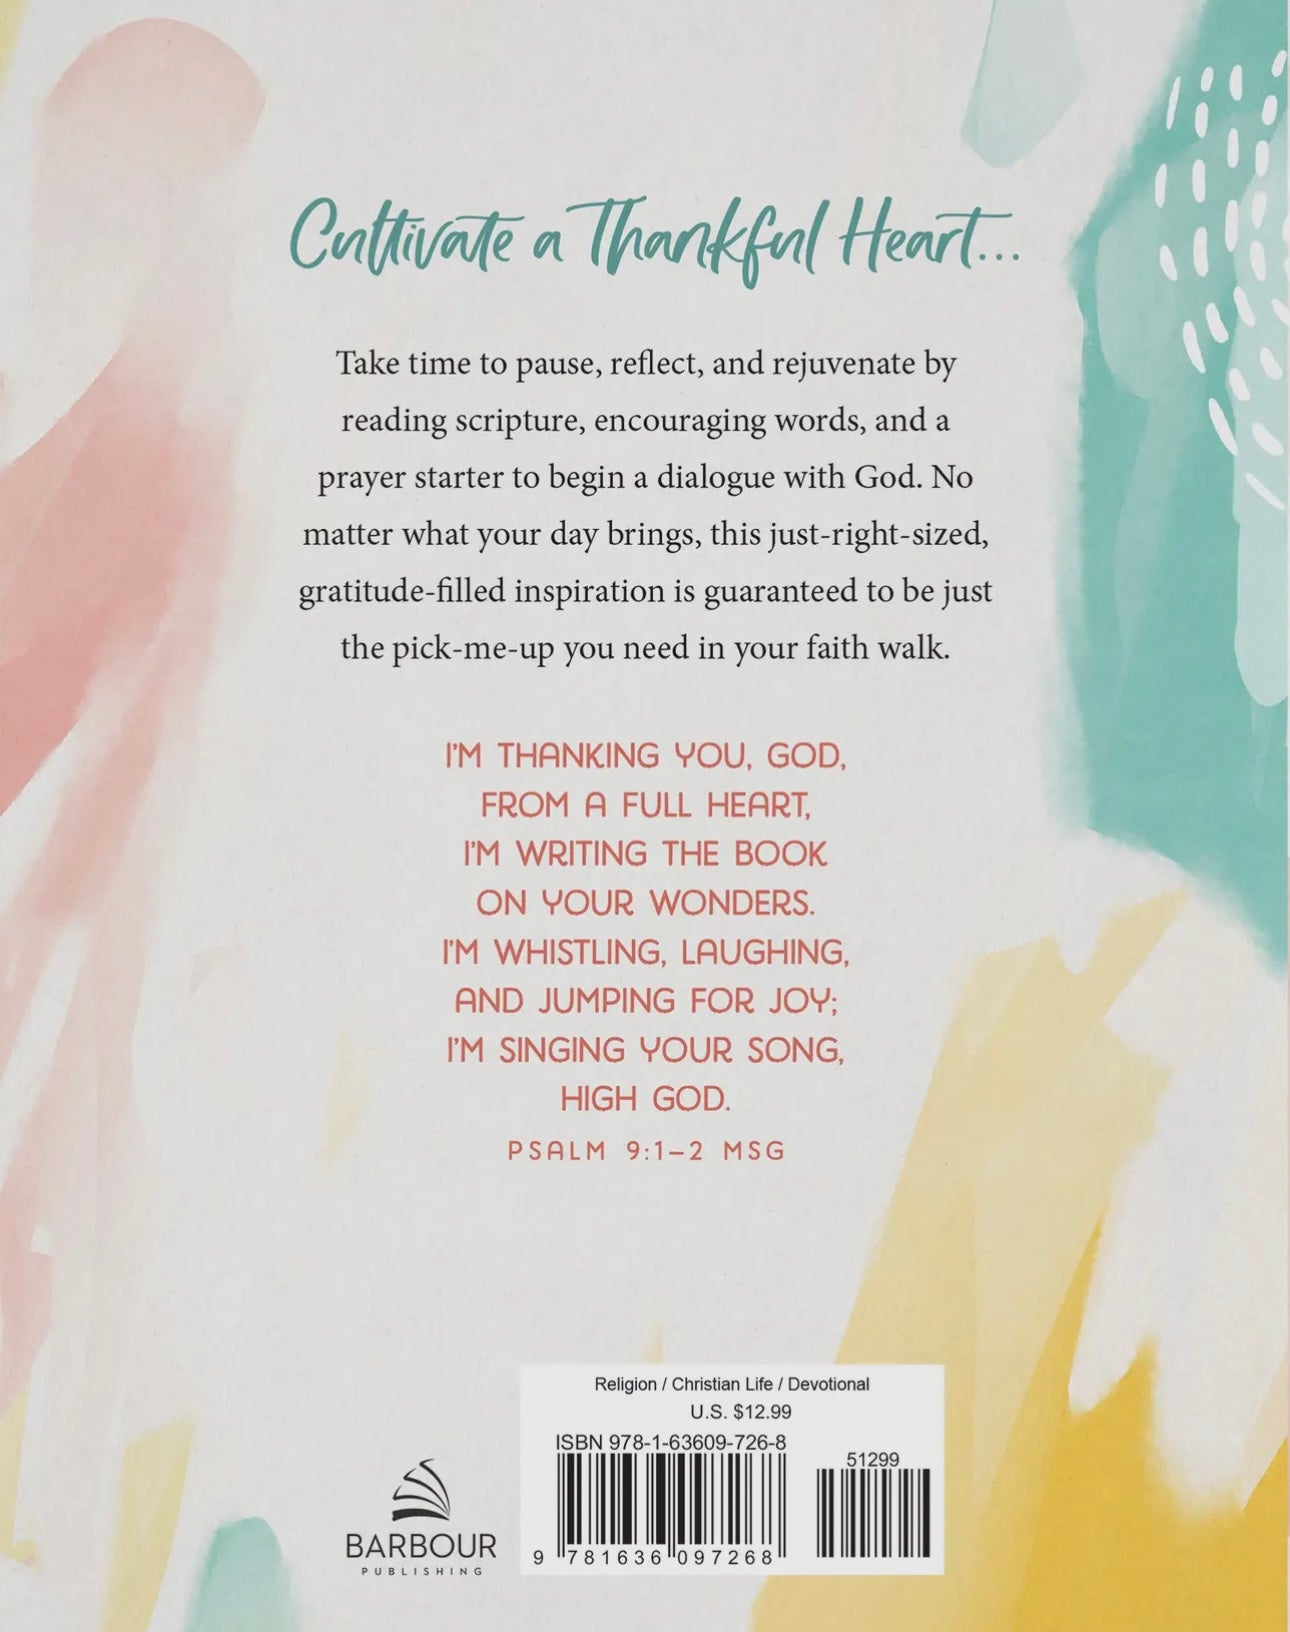 Three Minute Devotions for a Thankful Heart